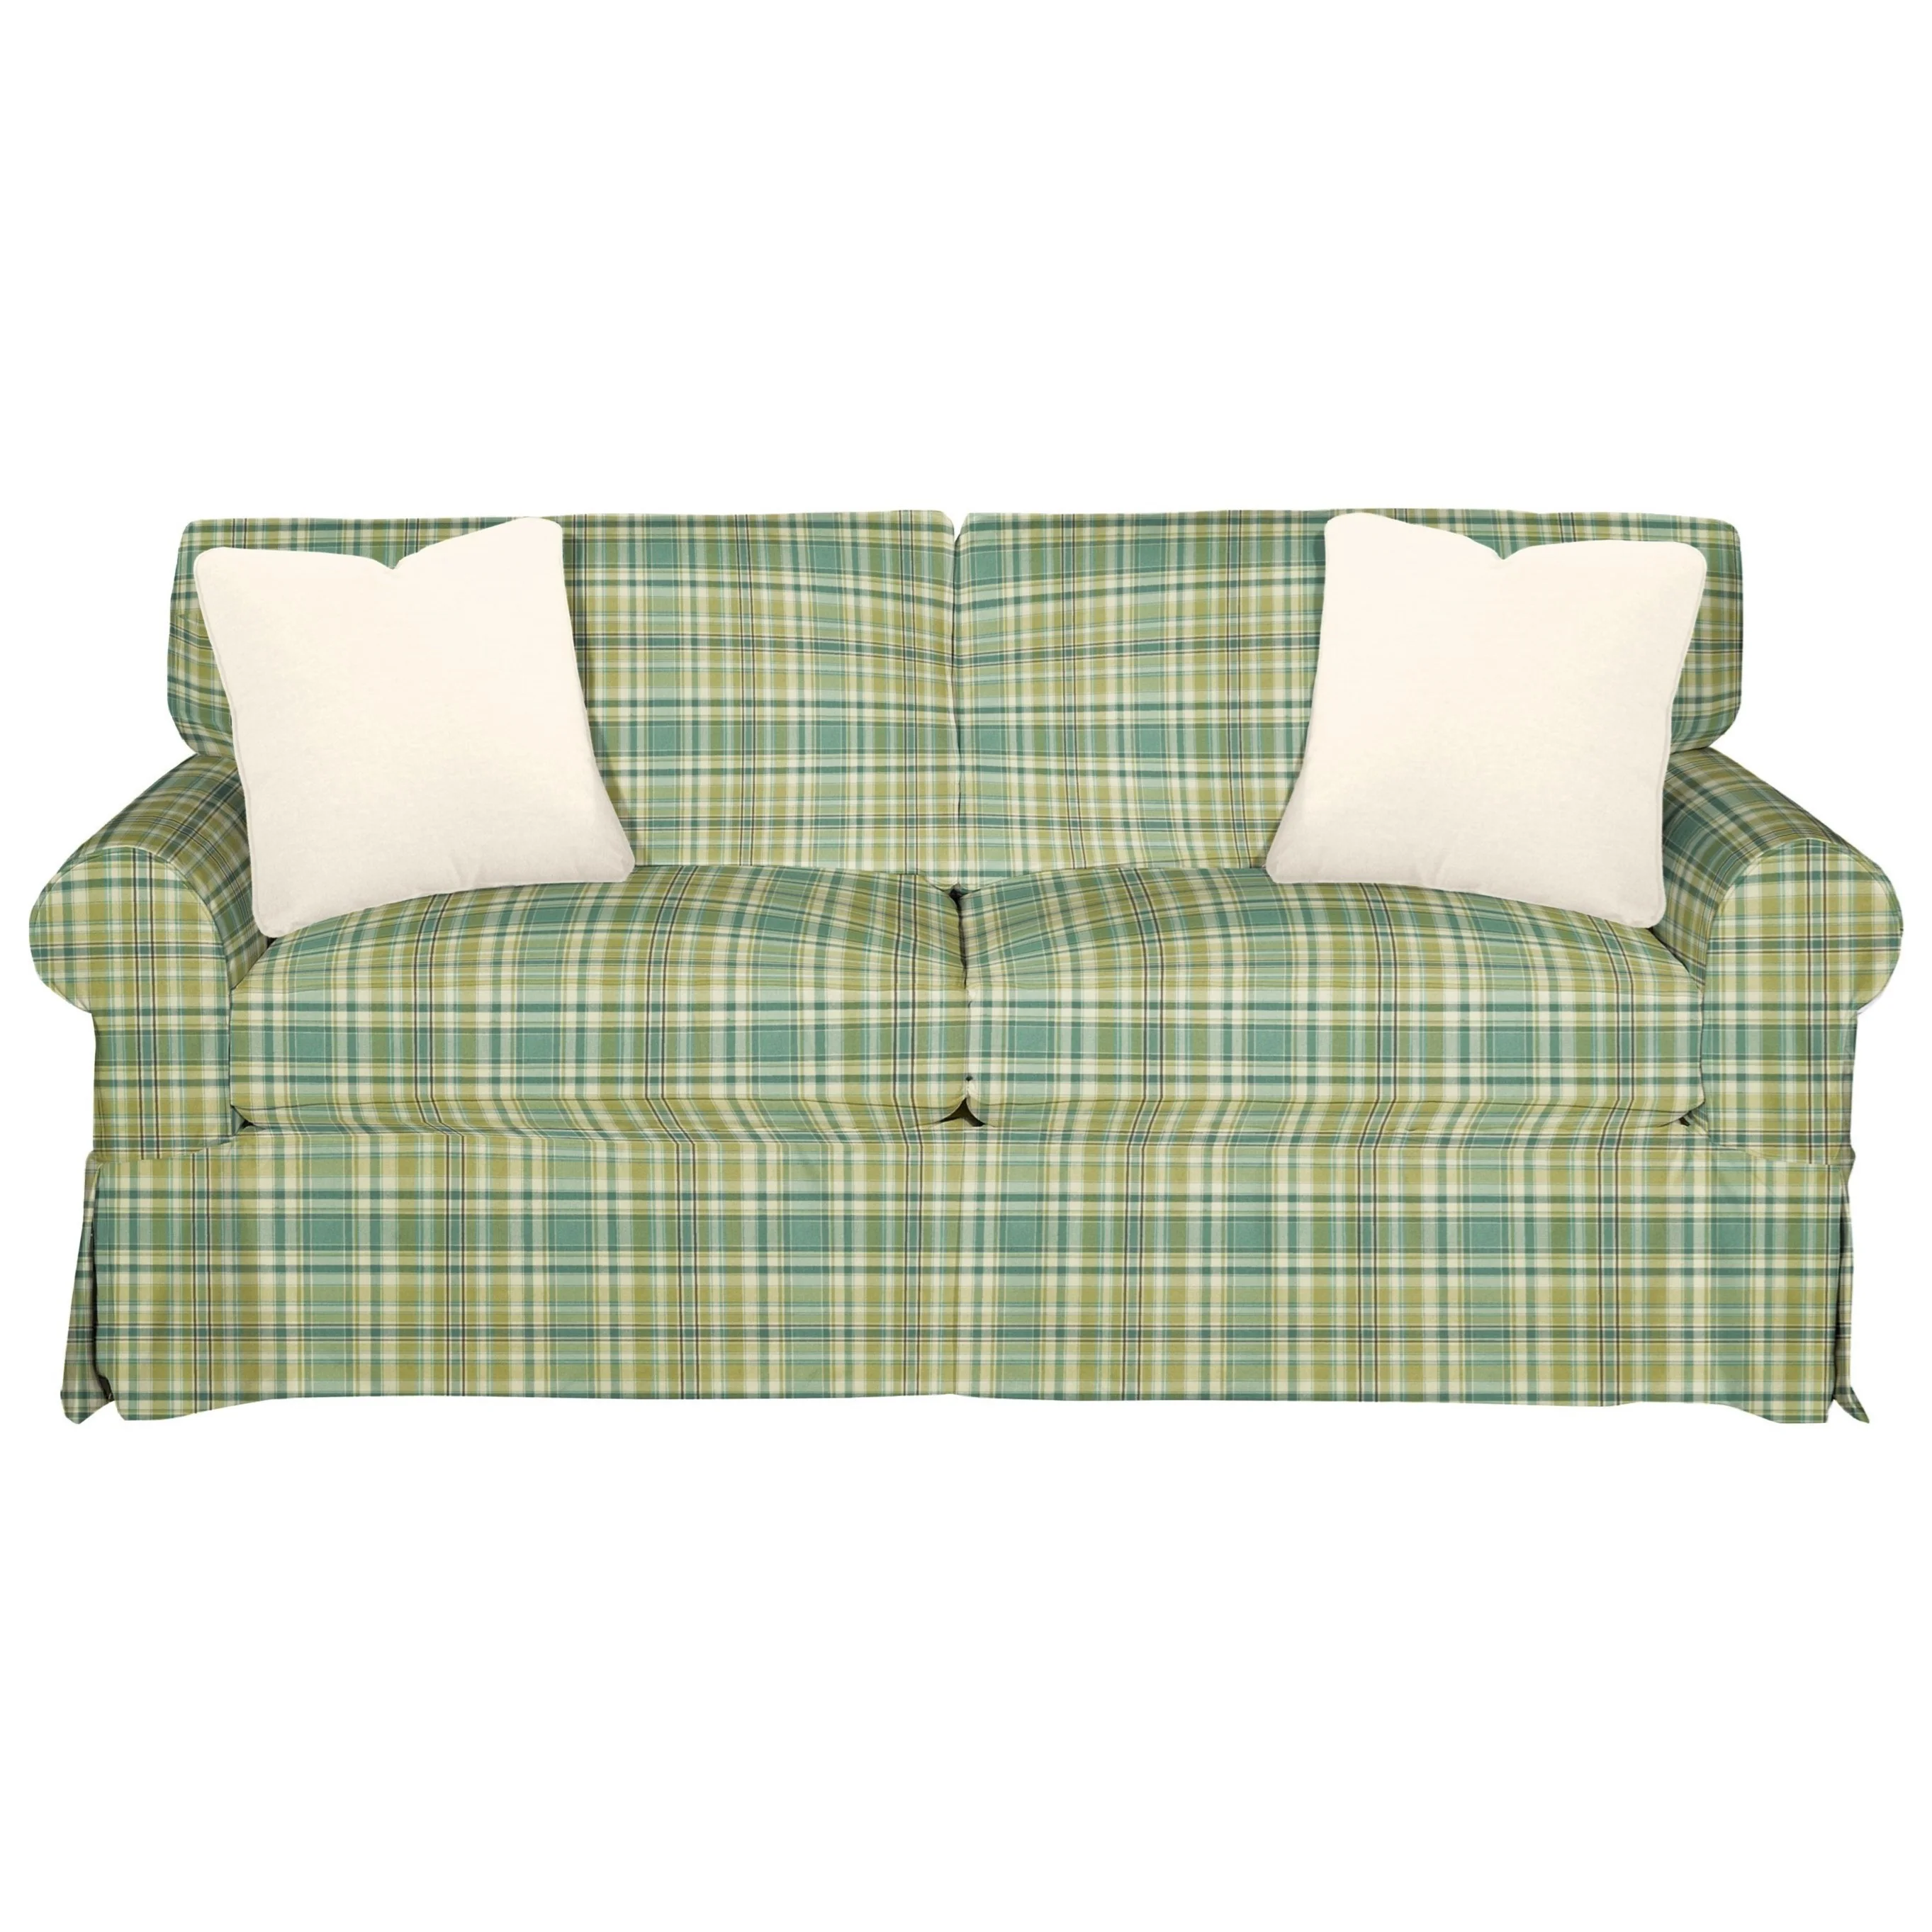 Craftmaster 922850 922850 Cottage Style Slipcover Sleeper Sofa with ...